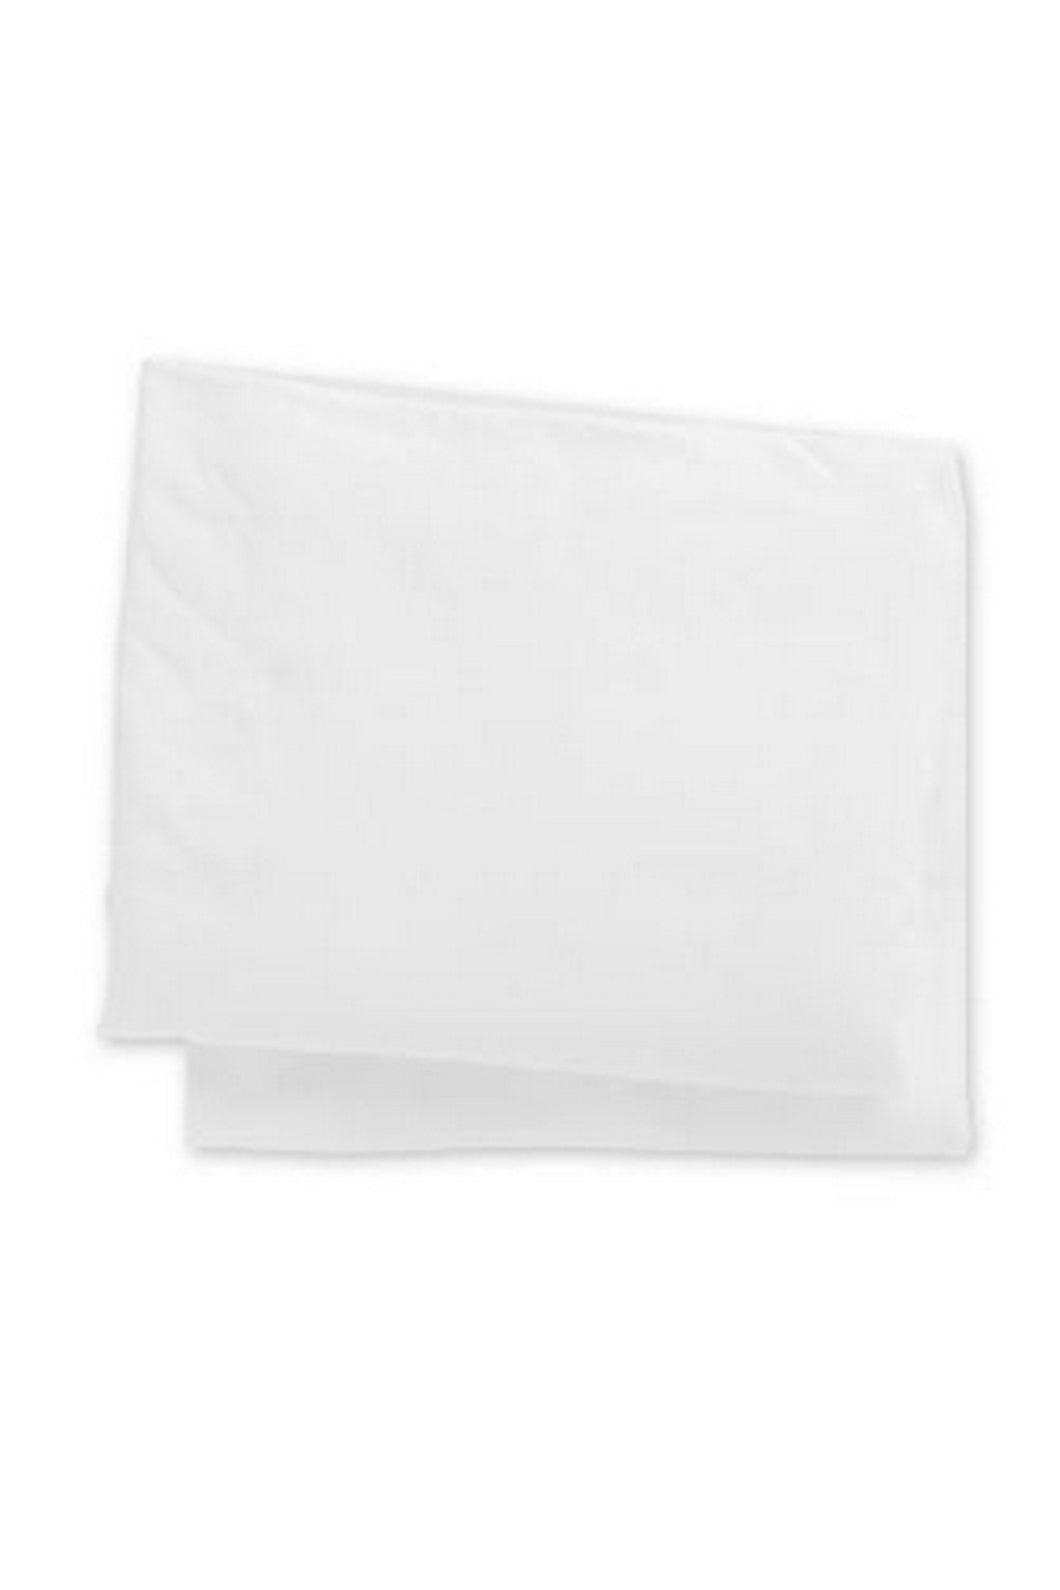 Mothercare White Jersey Cotton Fitted Moses Basketpram Sheets 2 Pack 1